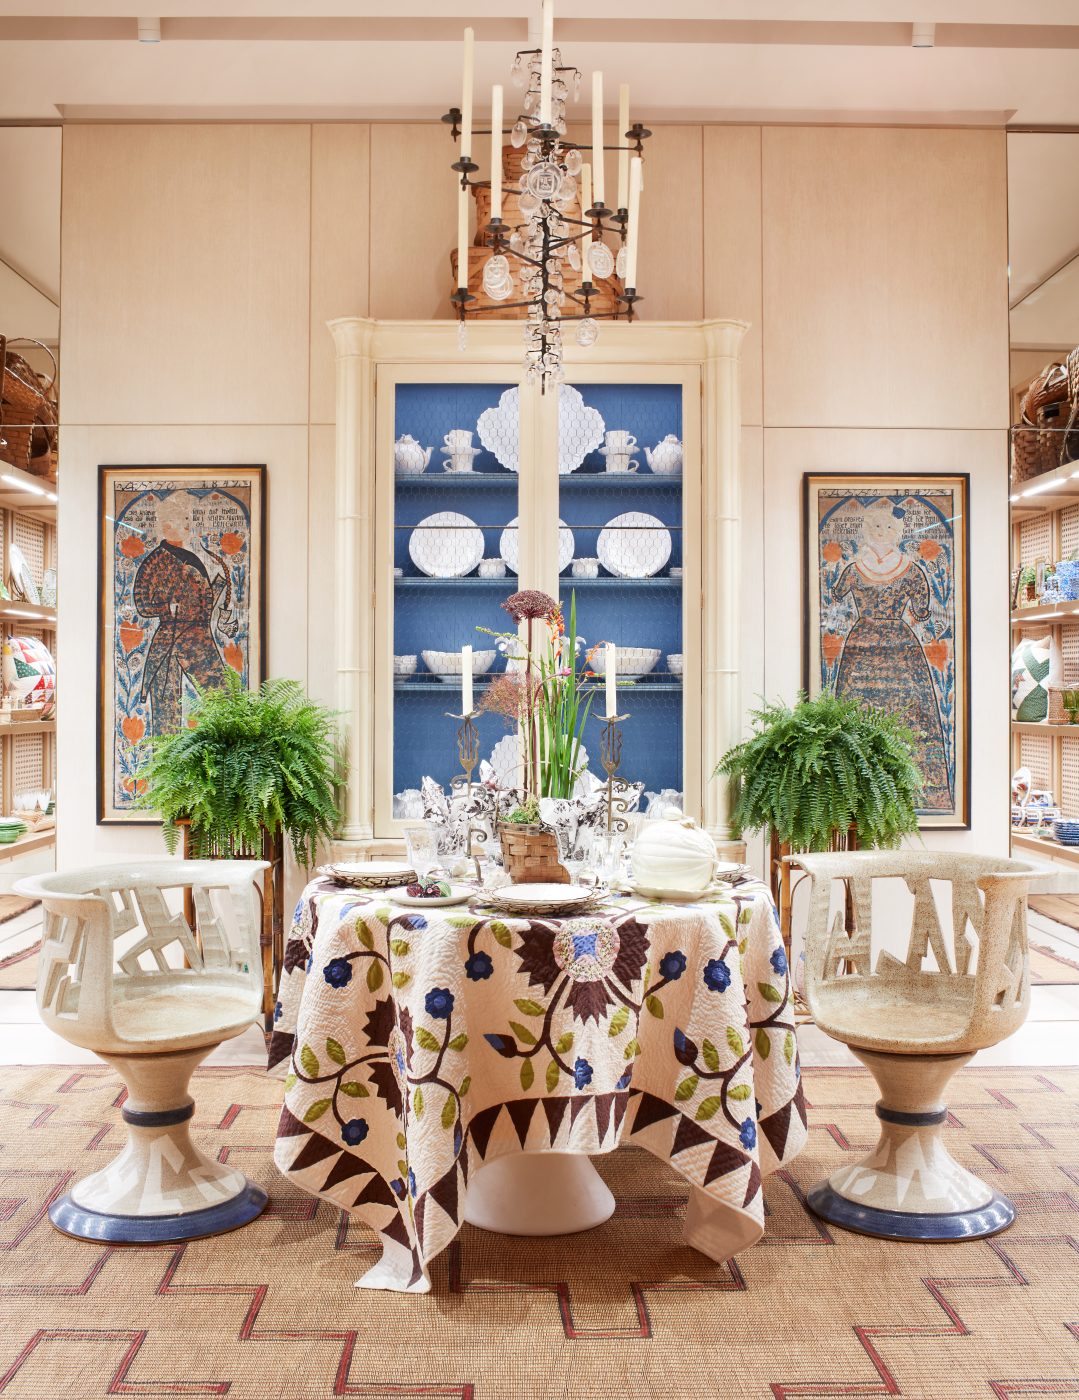 "The Tory Burch home collection is featured on the top floor of our 151 Mercer Street store, including our tableware collaboration with Dodie Thayer and a selection of found objects," the designer explains.